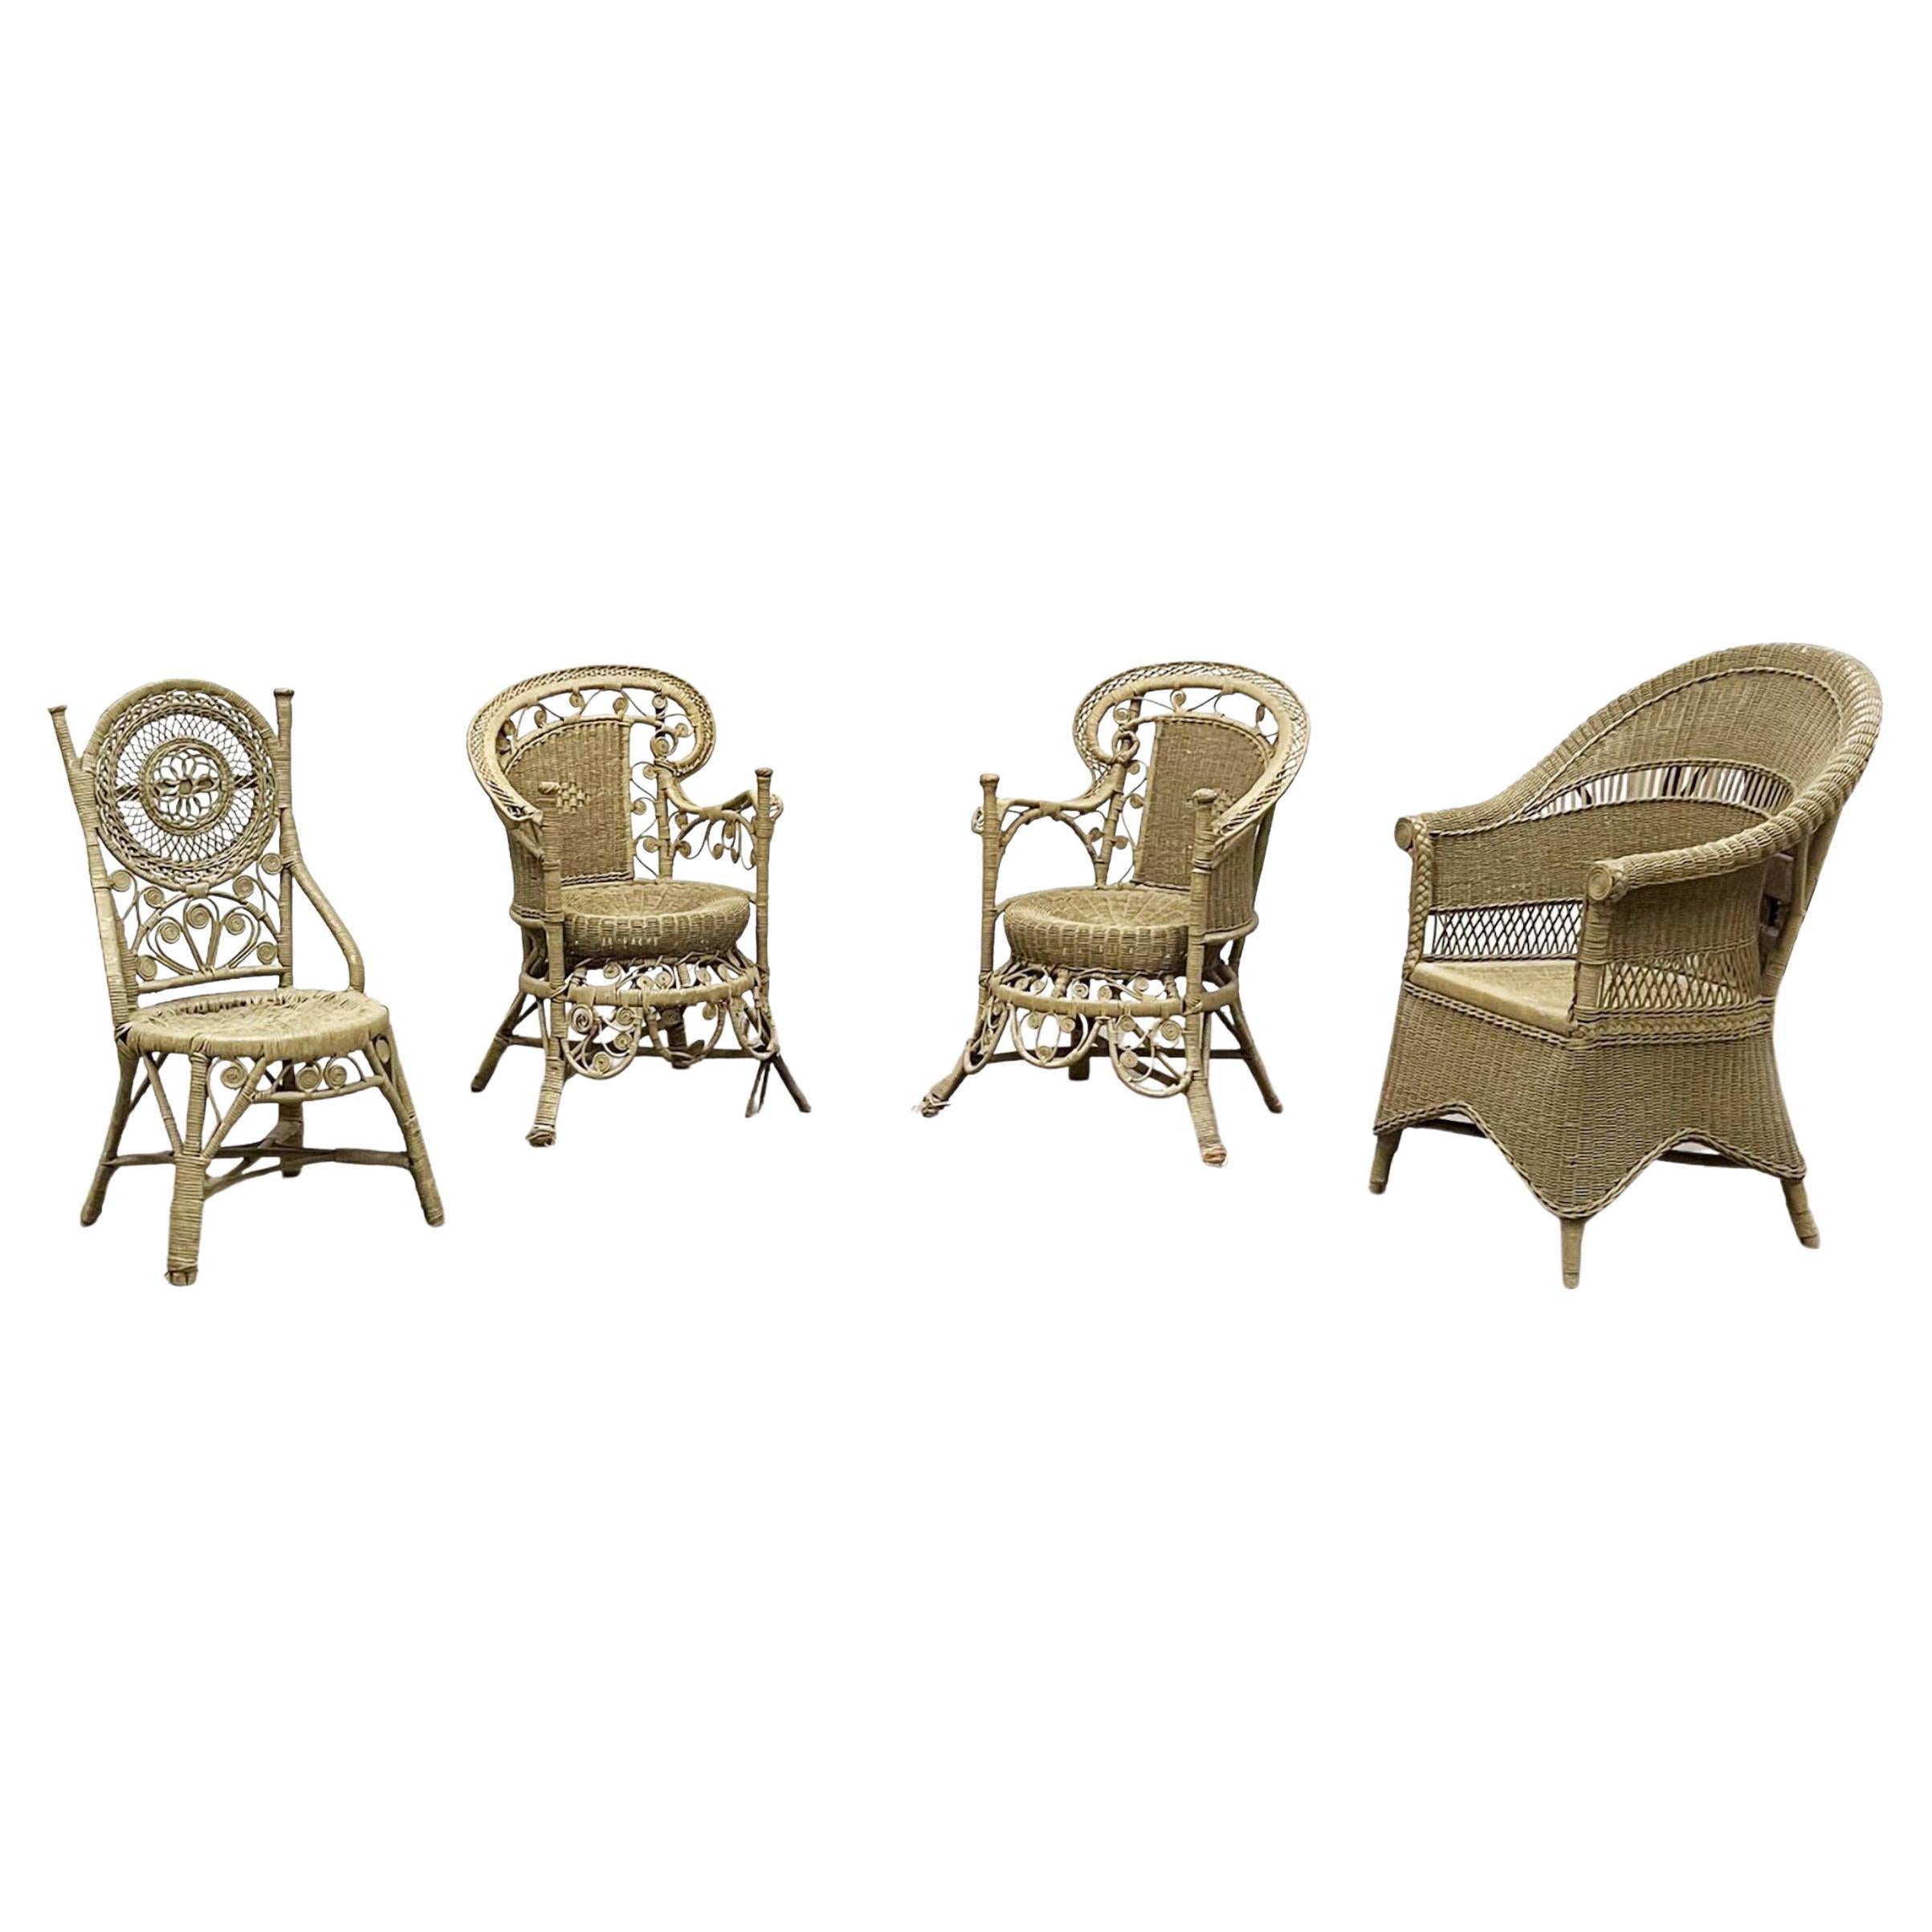 20th Century French Garden Chairs in Painted Cane with Different Shapes